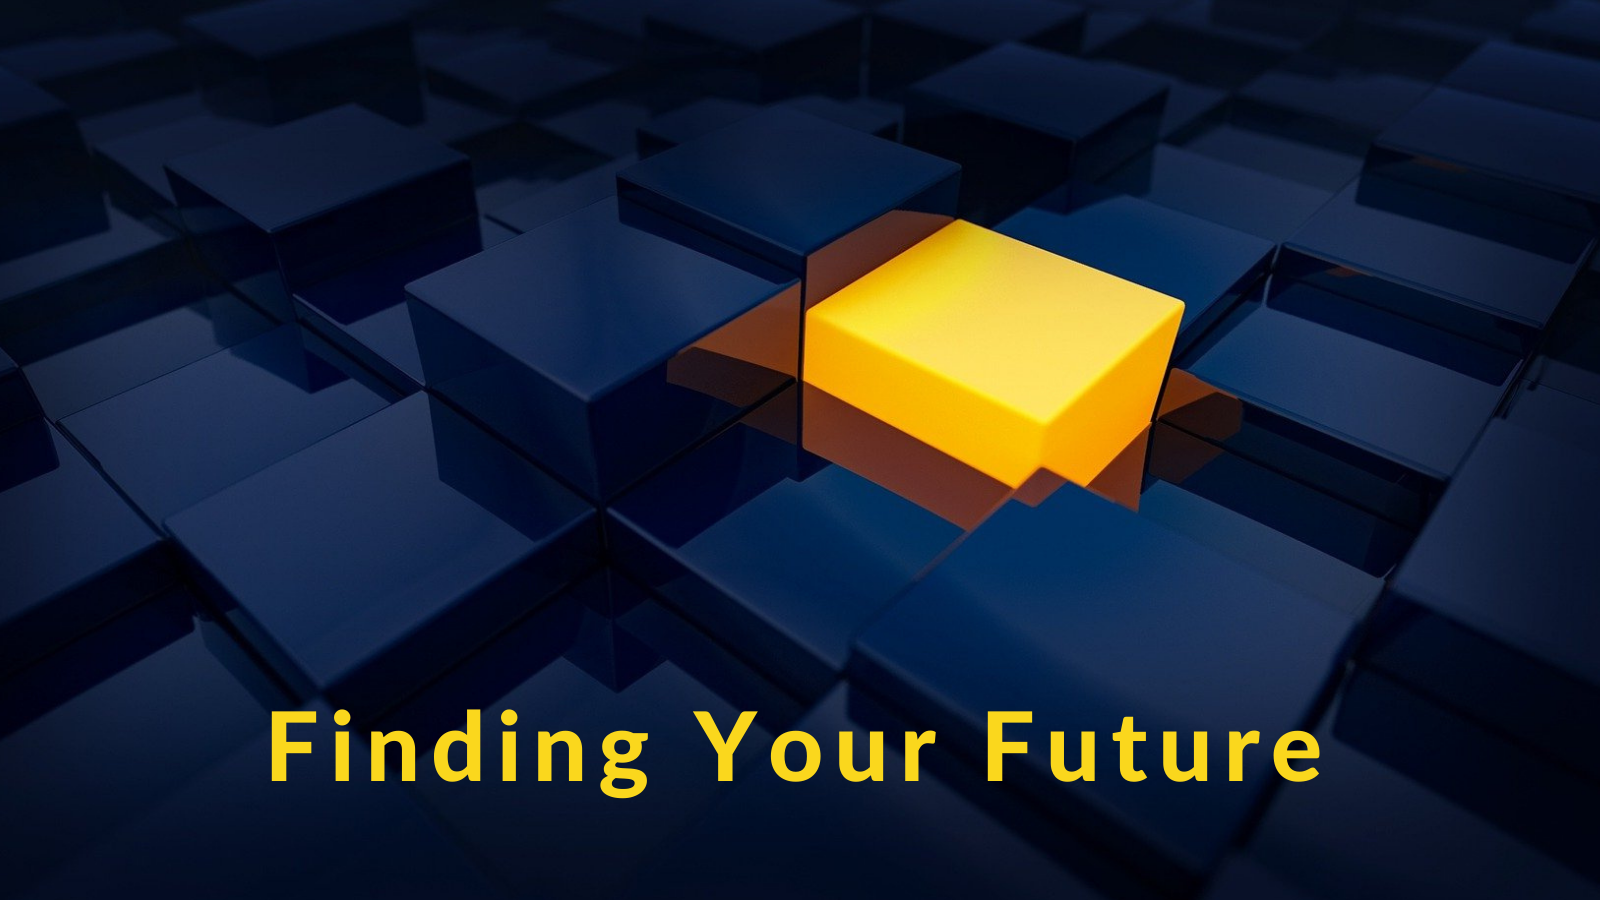 Dark blue boxes fill the image, with a single bright yellow cube in the middle sticking up. In matching yellow text at the bottom of the image is the phrase "Finding Your Future"